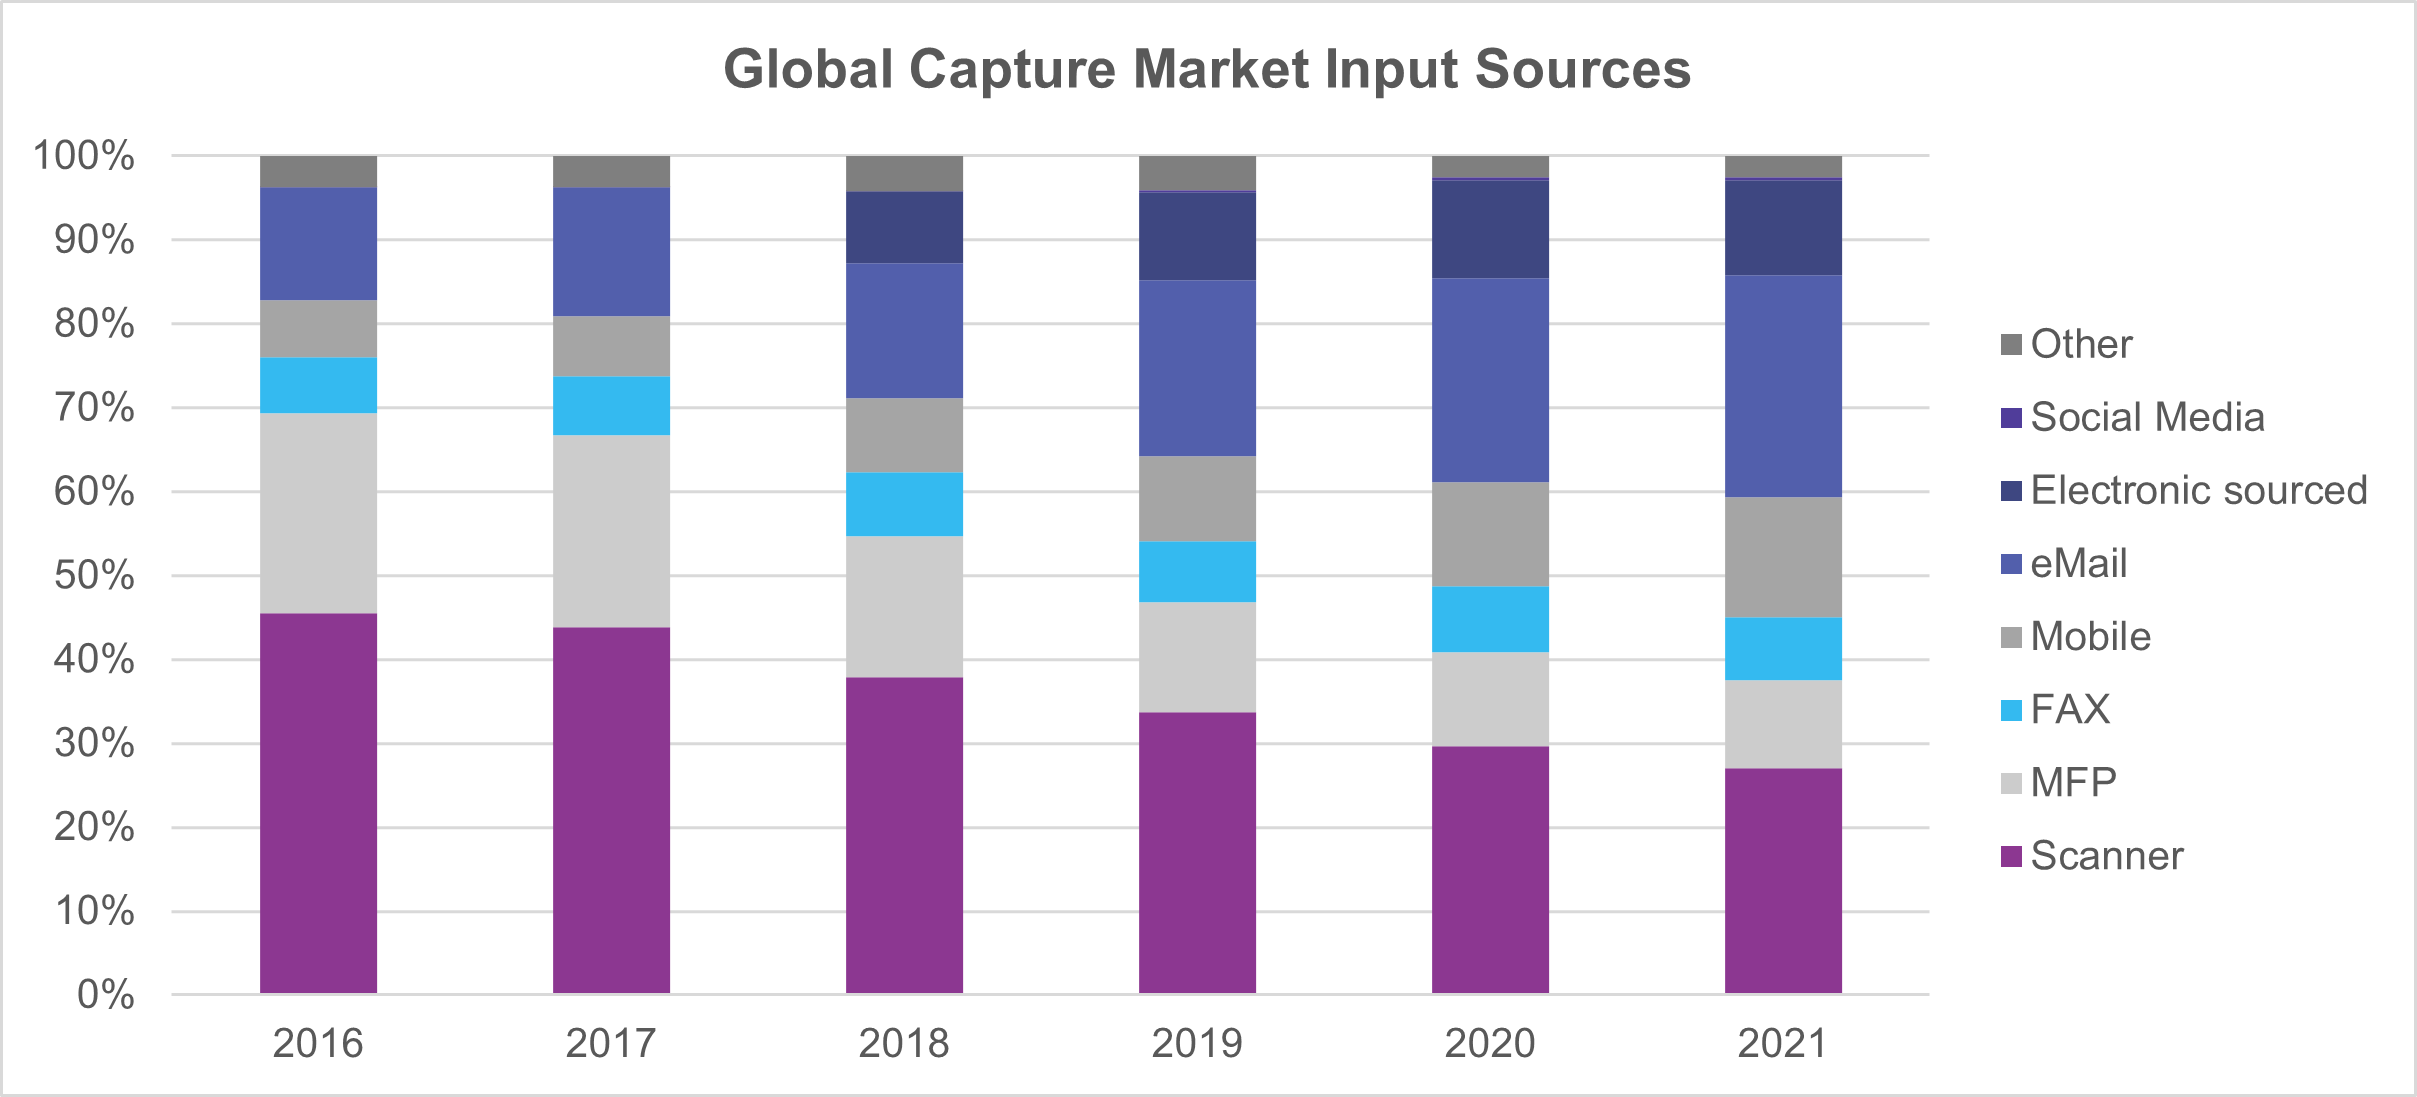 A graph that shows the global capture market input sources from 2016 to 2021.